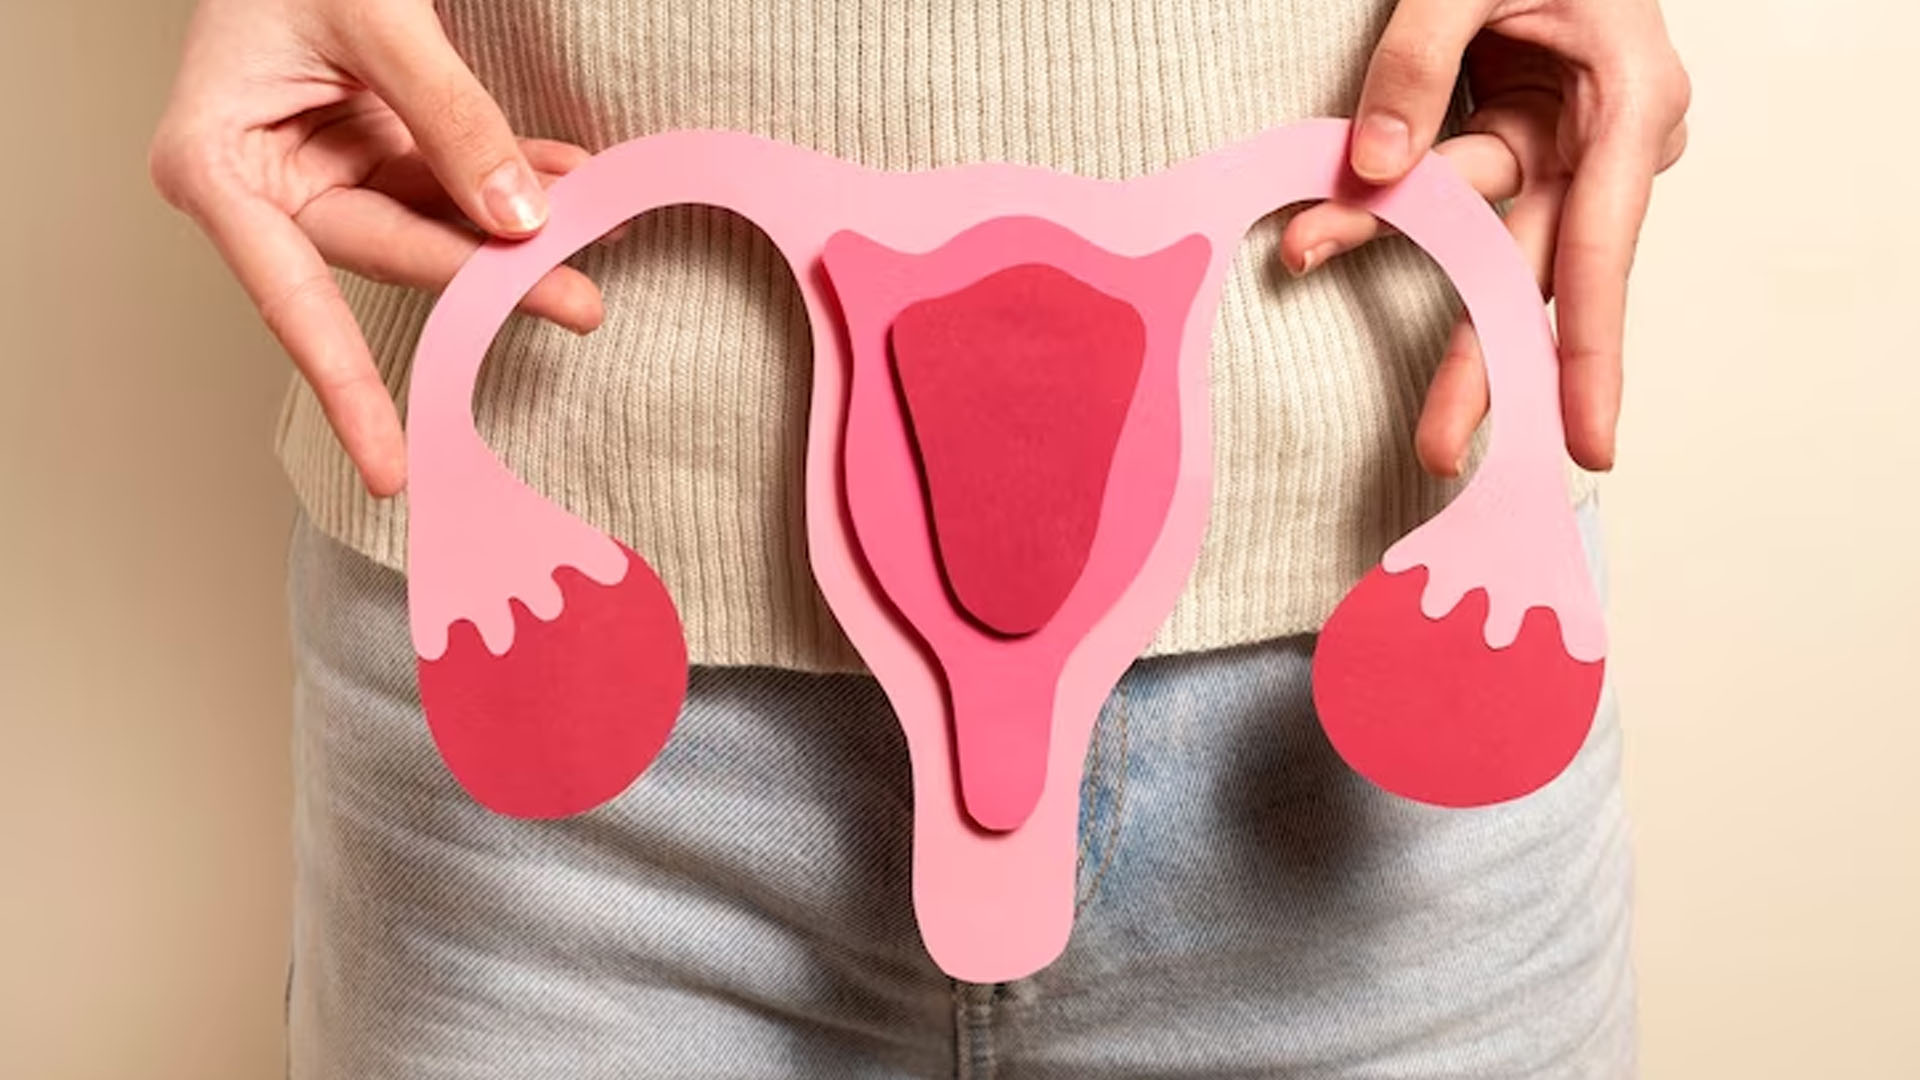 What are the Home Remedies for Uterine Incontinence?